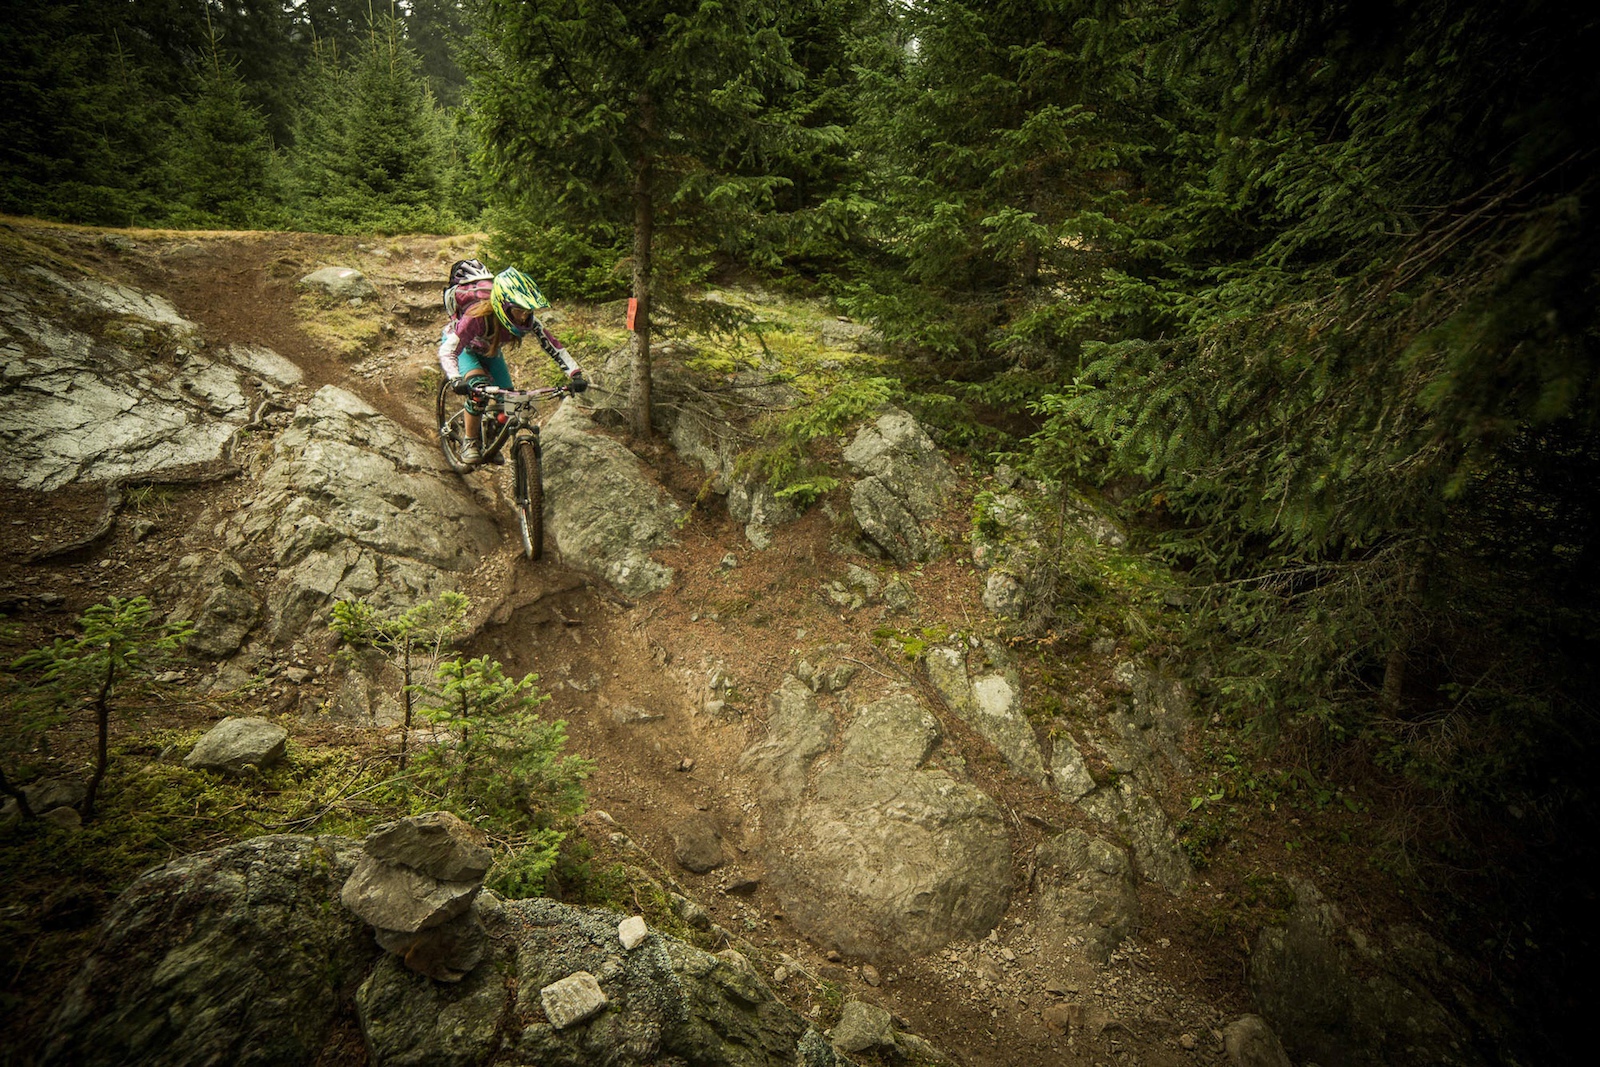 European Enduro players will come together again on the 4th stop of the European Enduro Series in Nauders, Austria, 23rd and 24th of August. Photo by Tom Bause